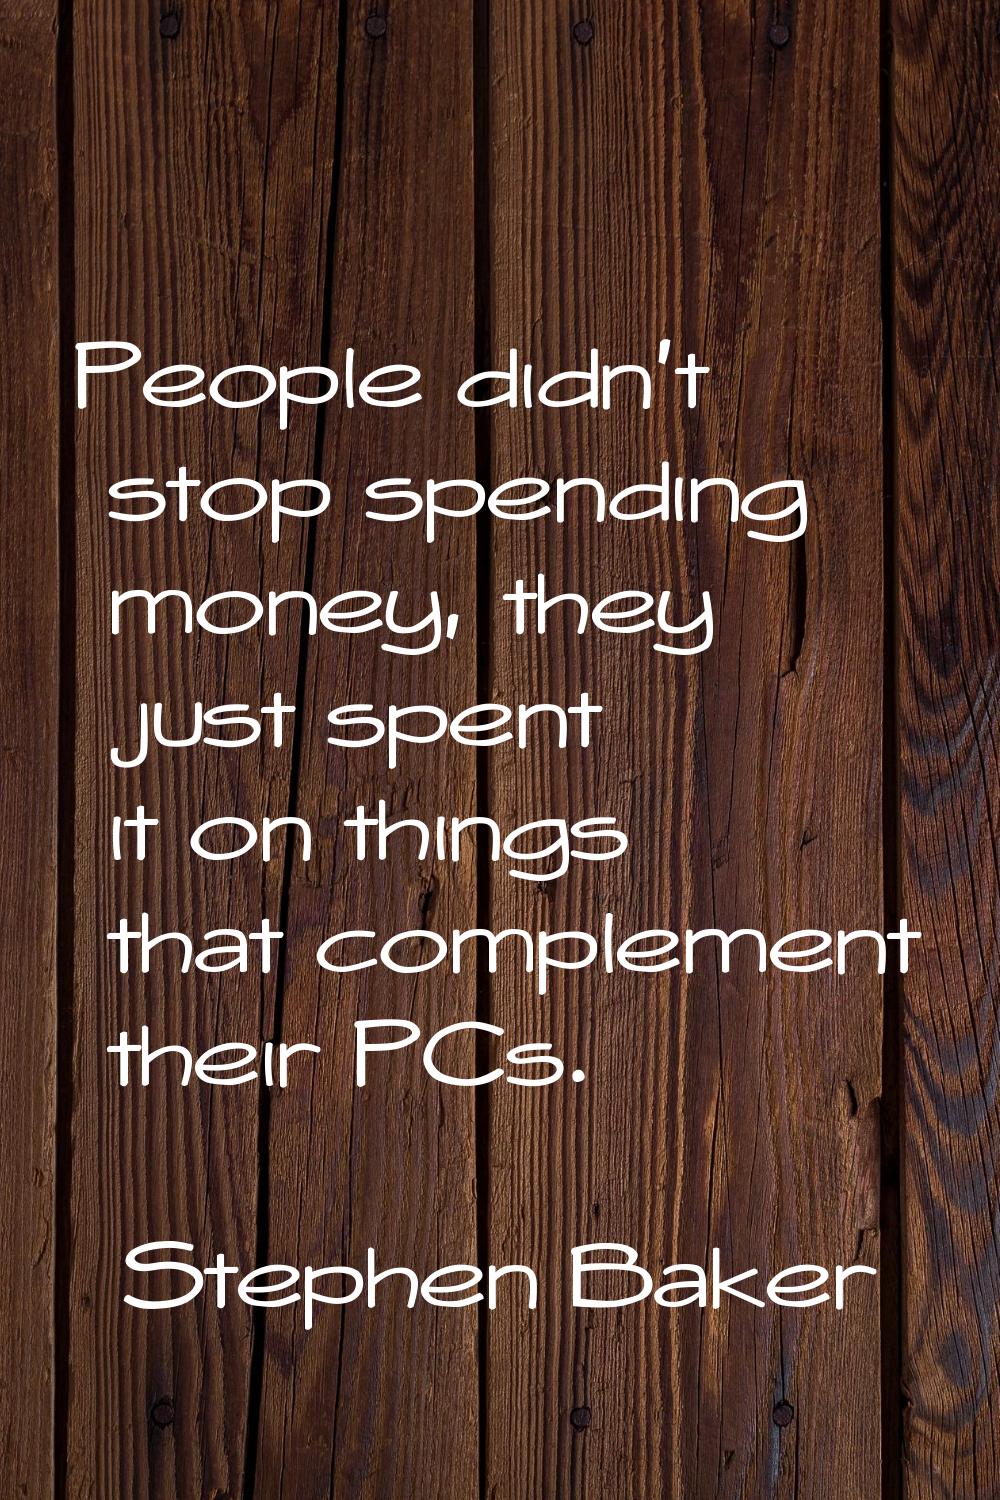 People didn't stop spending money, they just spent it on things that complement their PCs.